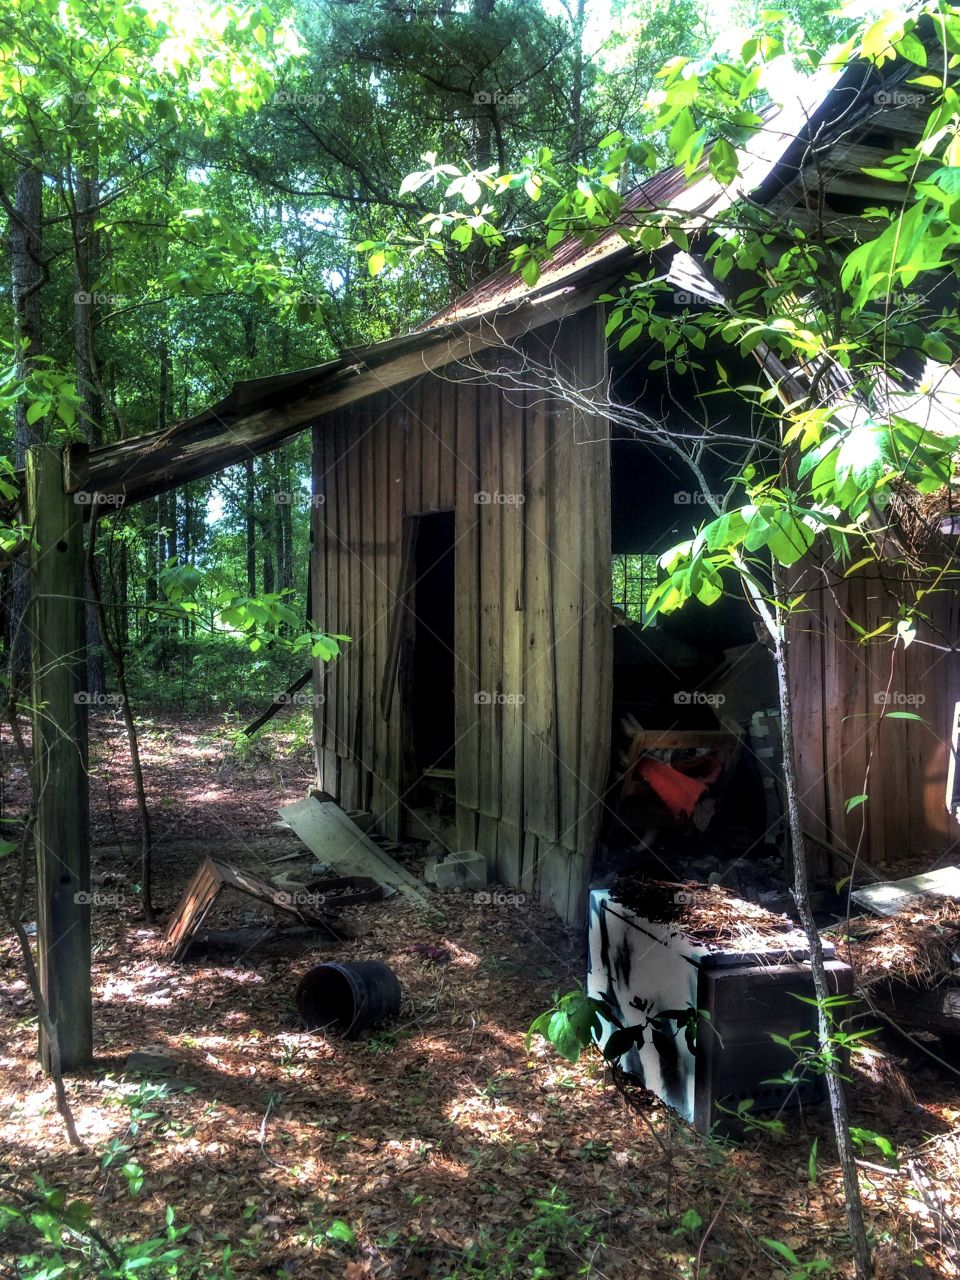 Forest Shed